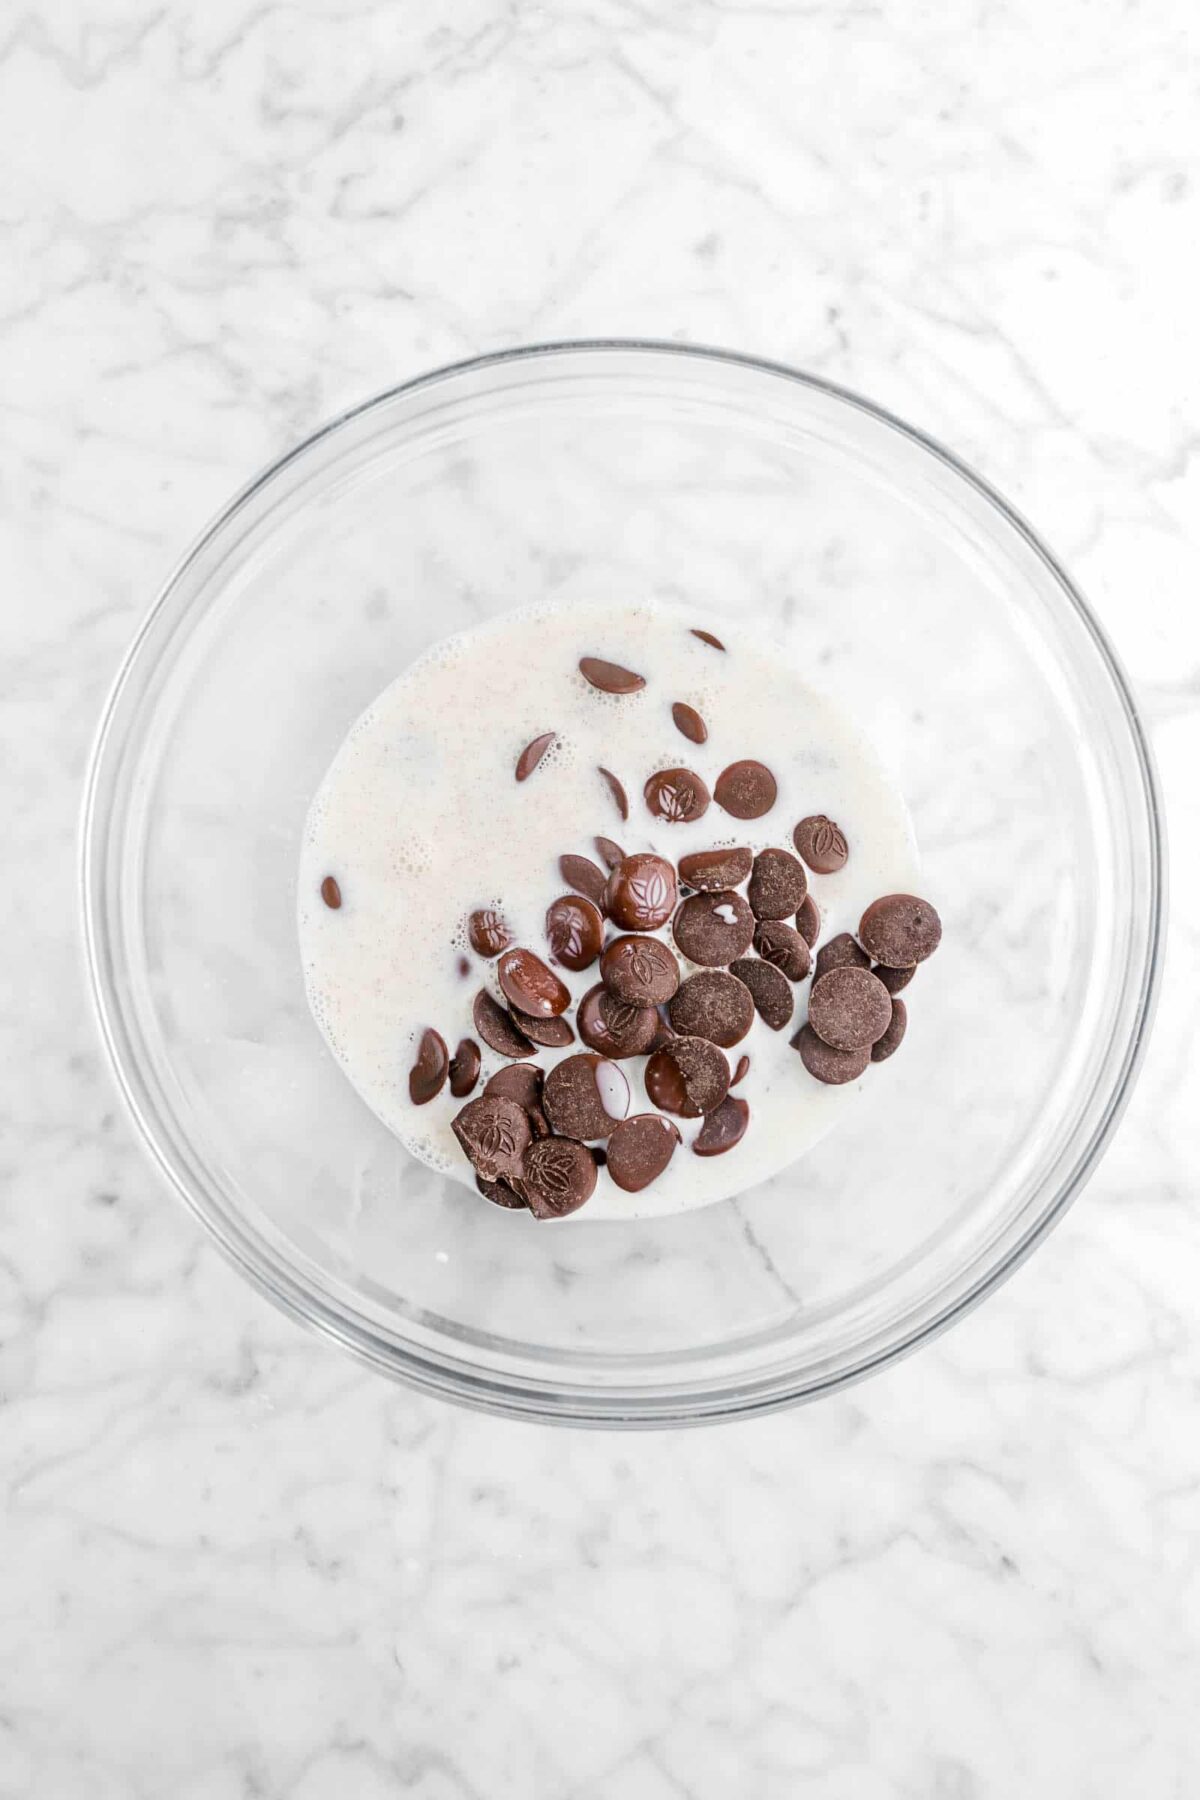 cream and chocolate chips in glass bowl